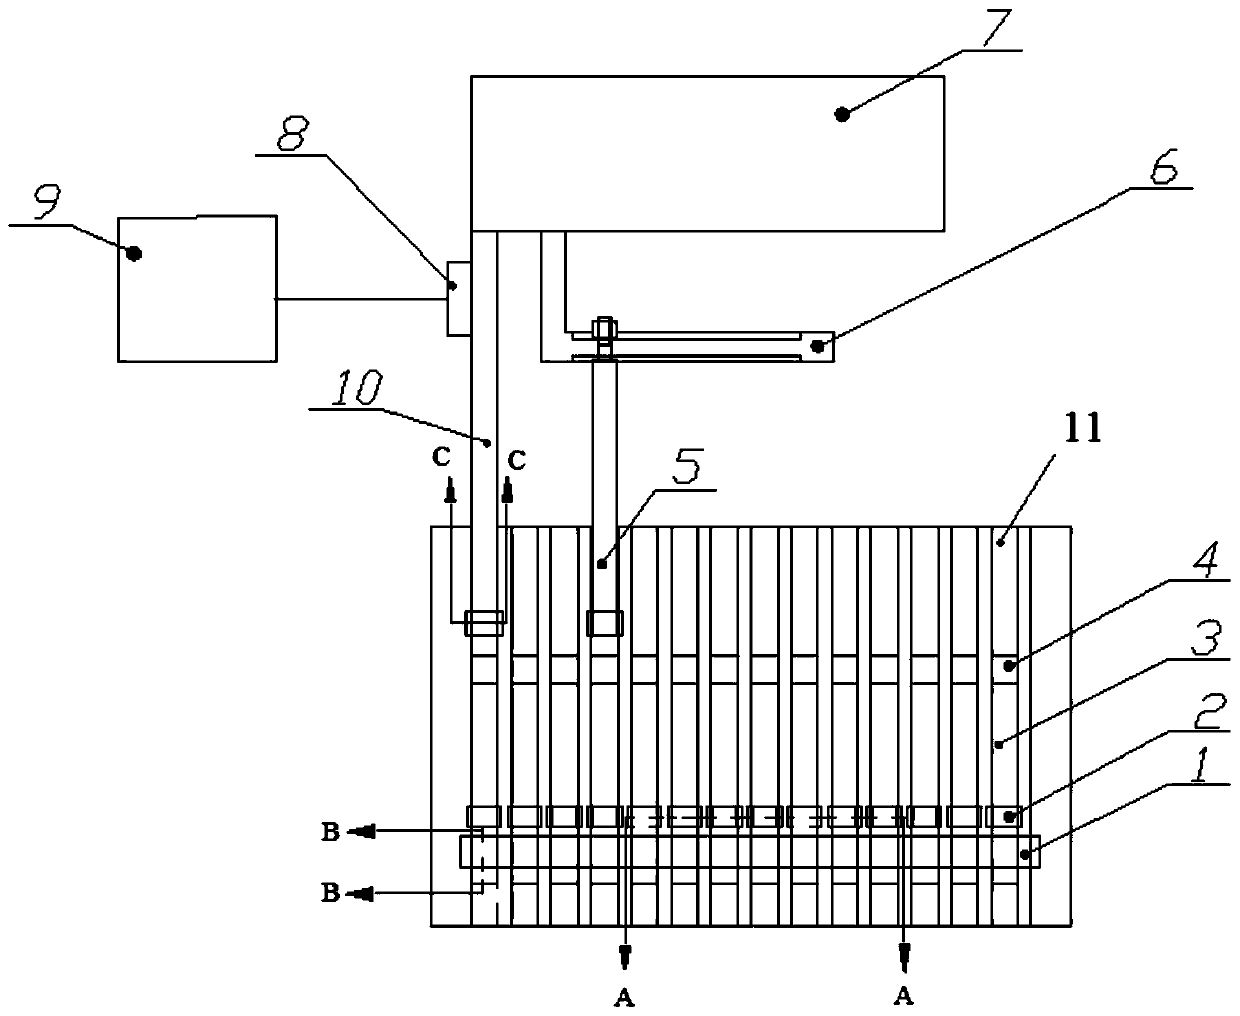 A mechanical performance testing device for micron-sized monofilament fibers